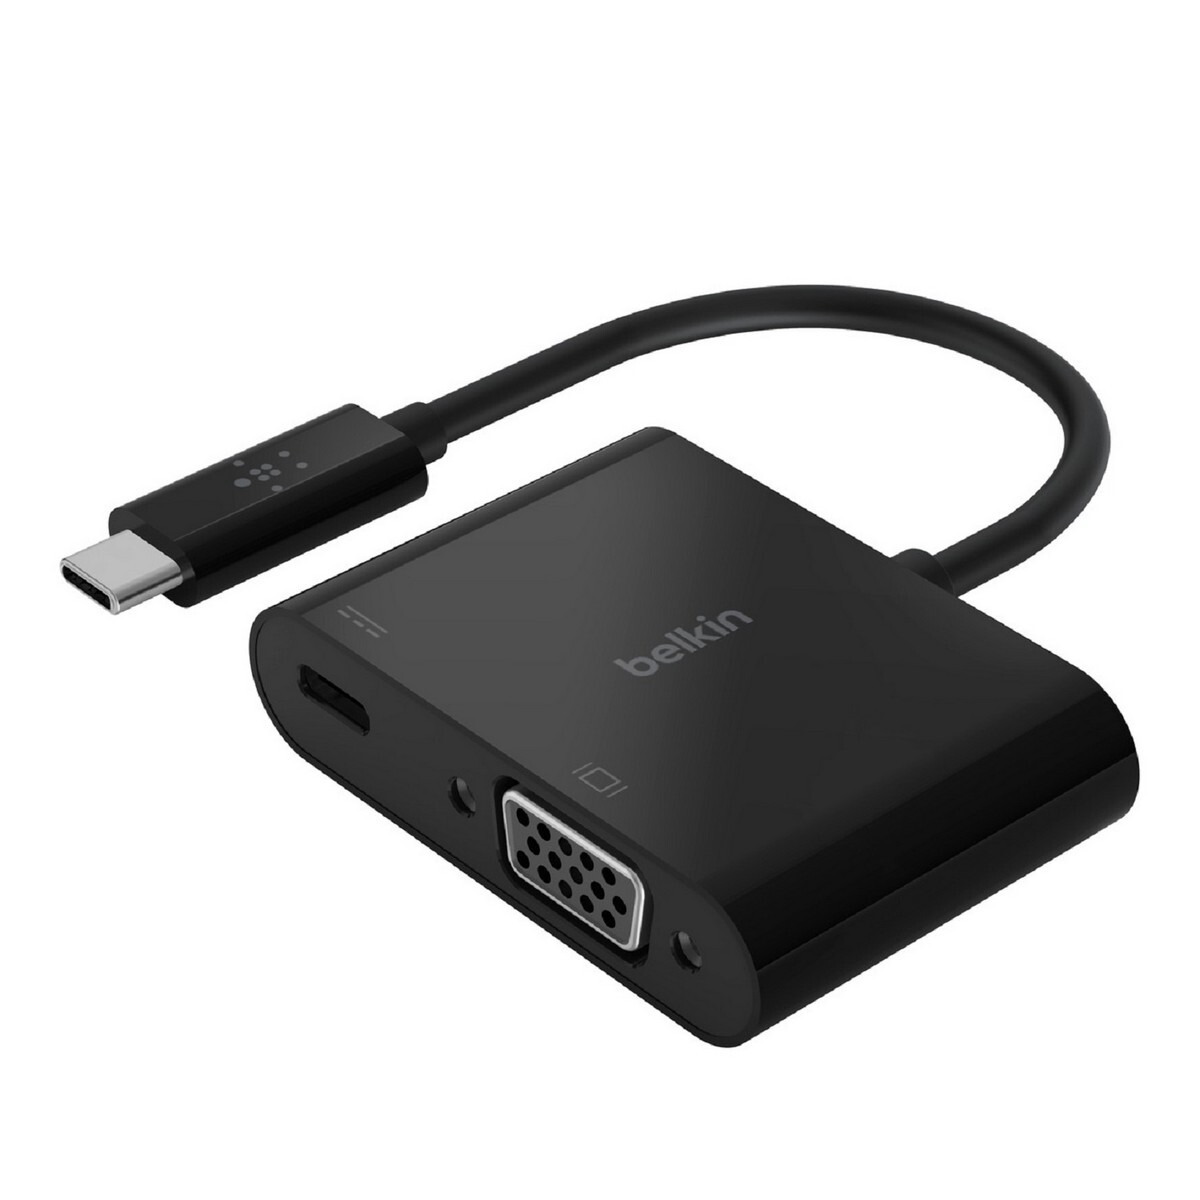 Belkin USB-C to VGA Charger Adapter